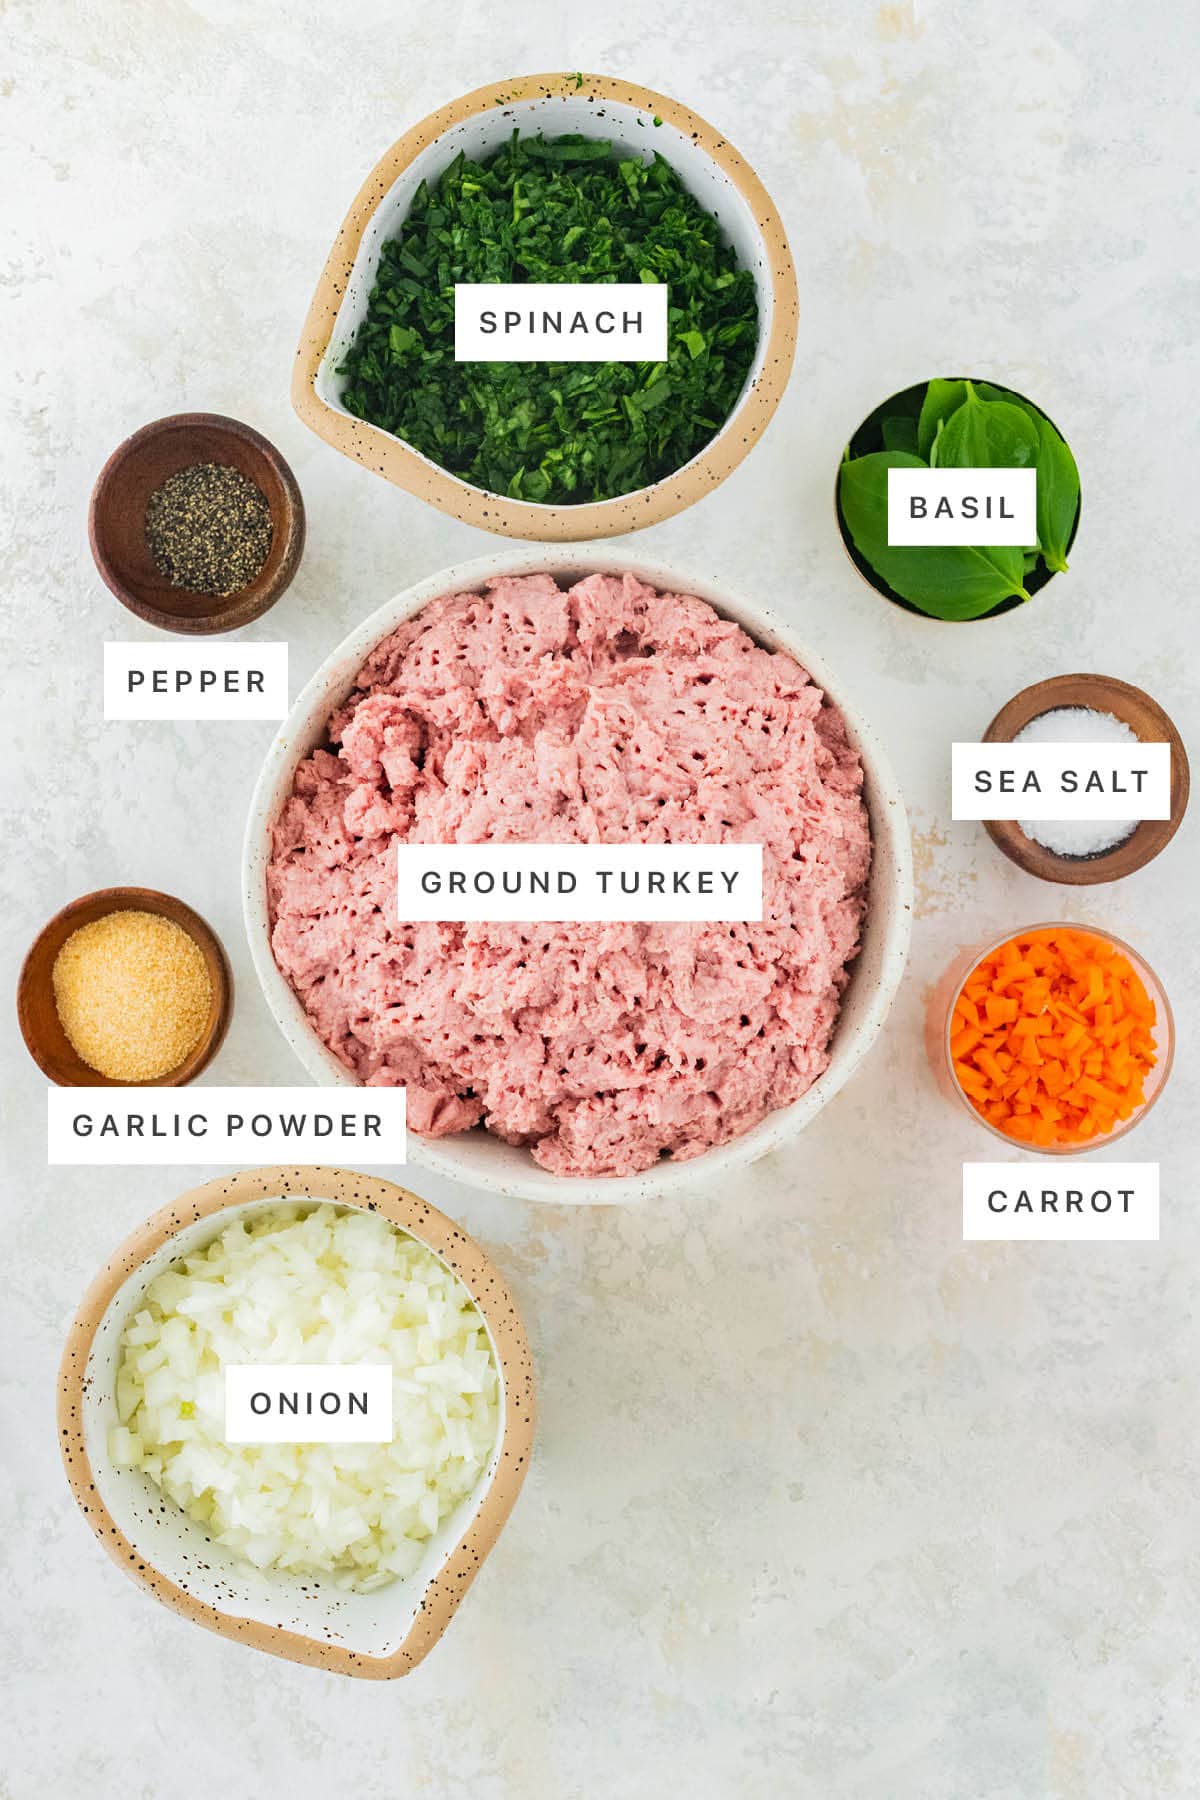 Ingredients measured out to make Turkey Spinach Meatballs: spinach, pepper, basil, ground turkey, sea salt, garlic powder, carrot and onion.